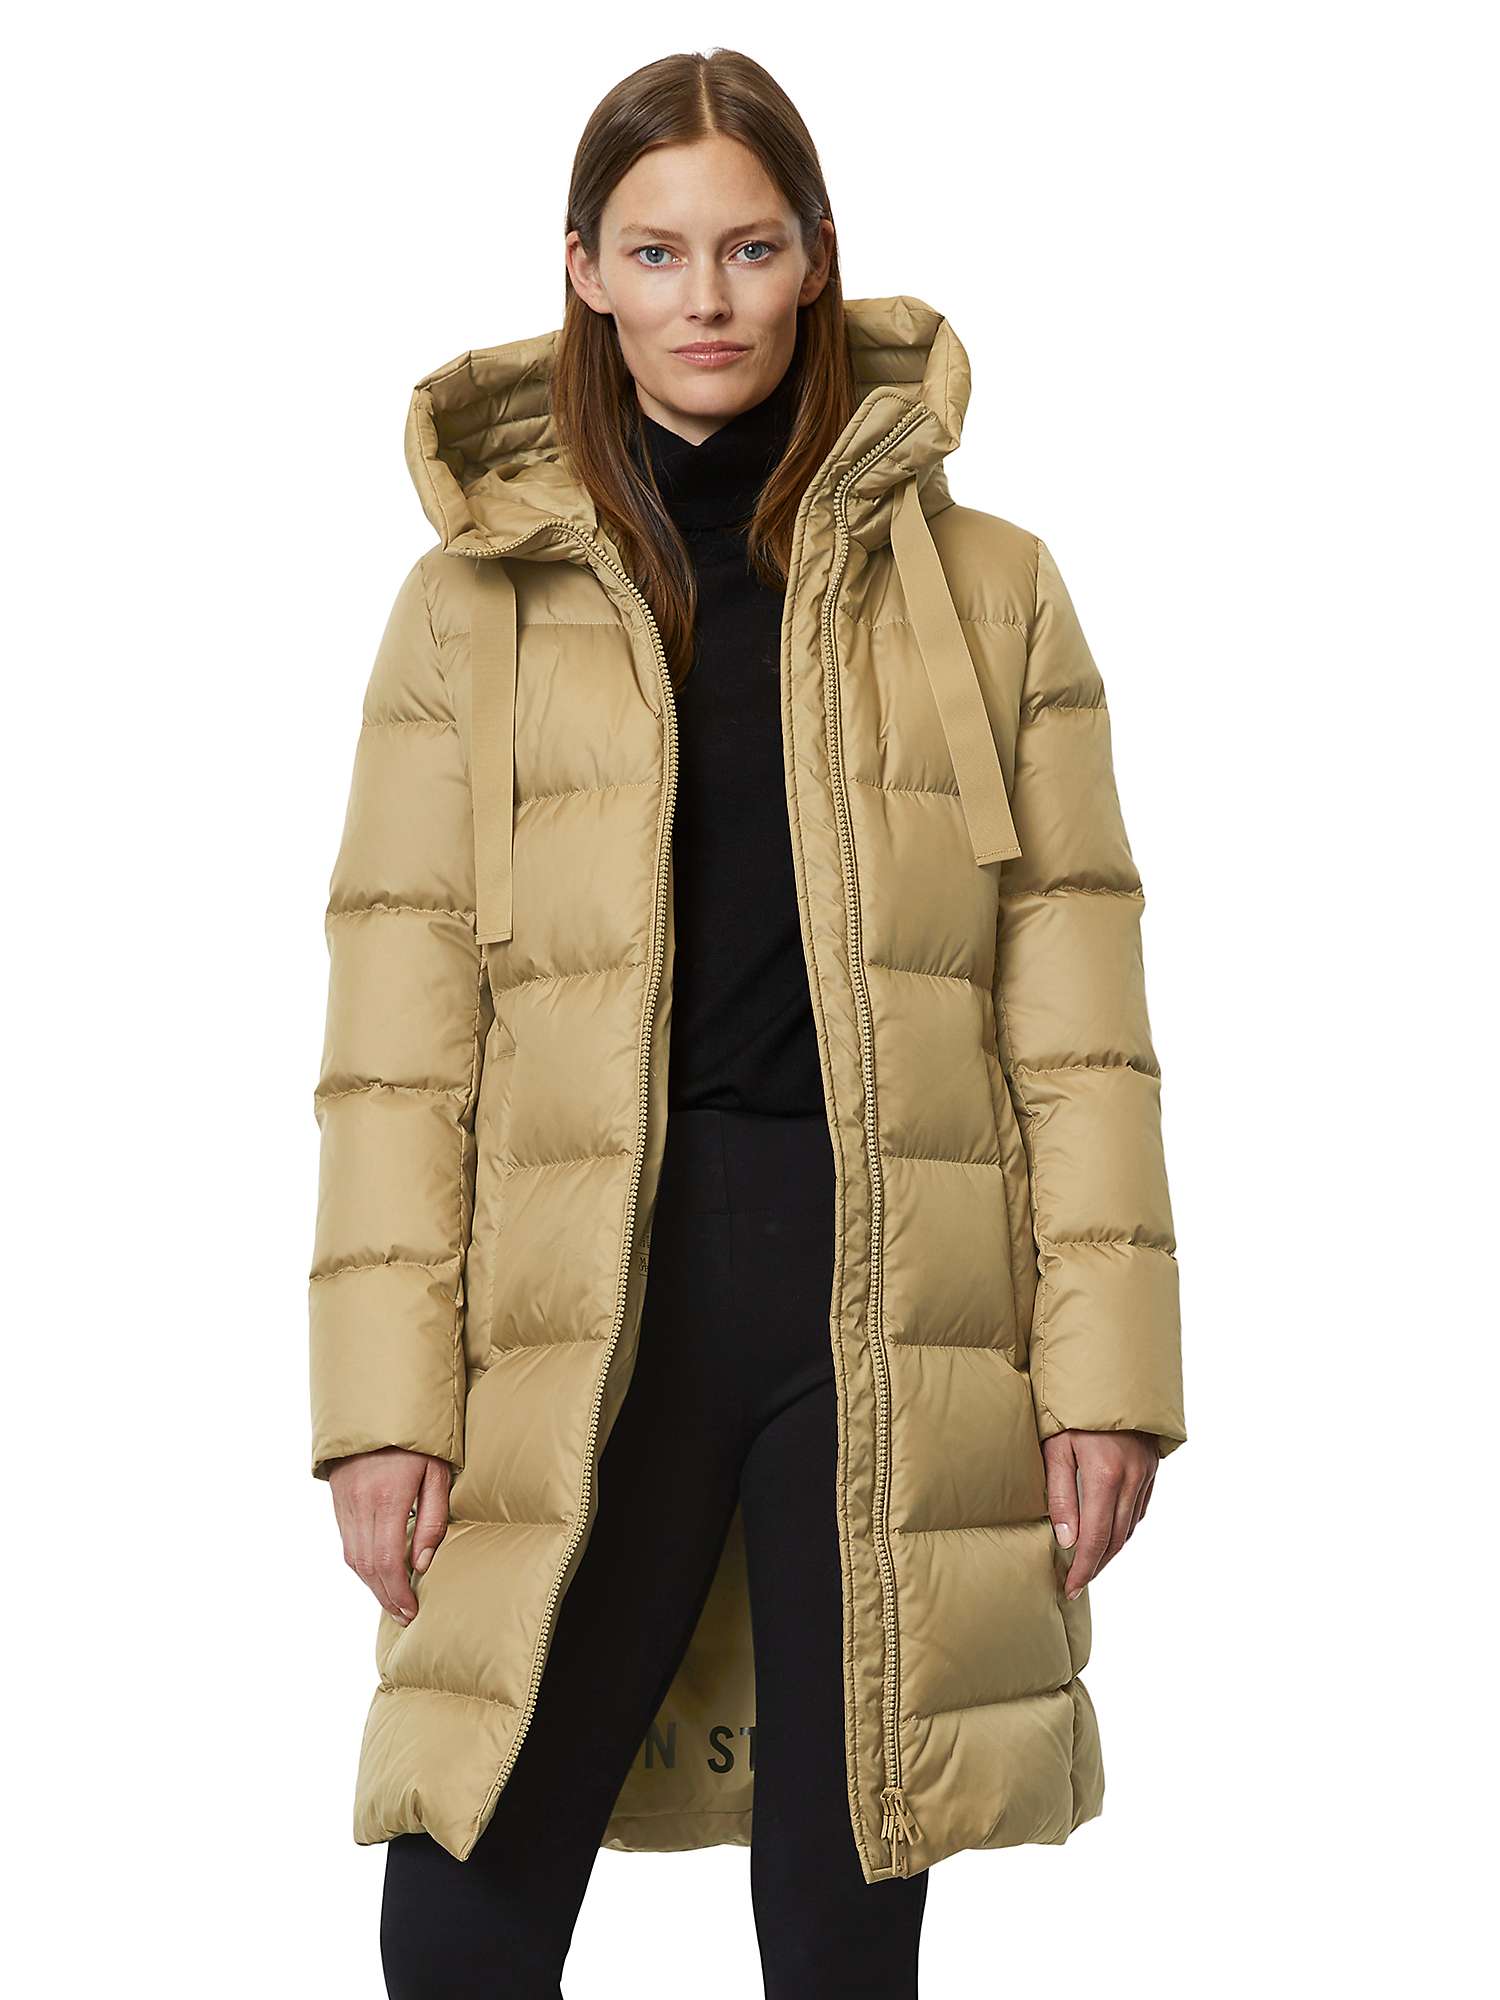 Buy Marc O'Polo Hooded Quilted Parka, Stone Hearth Online at johnlewis.com